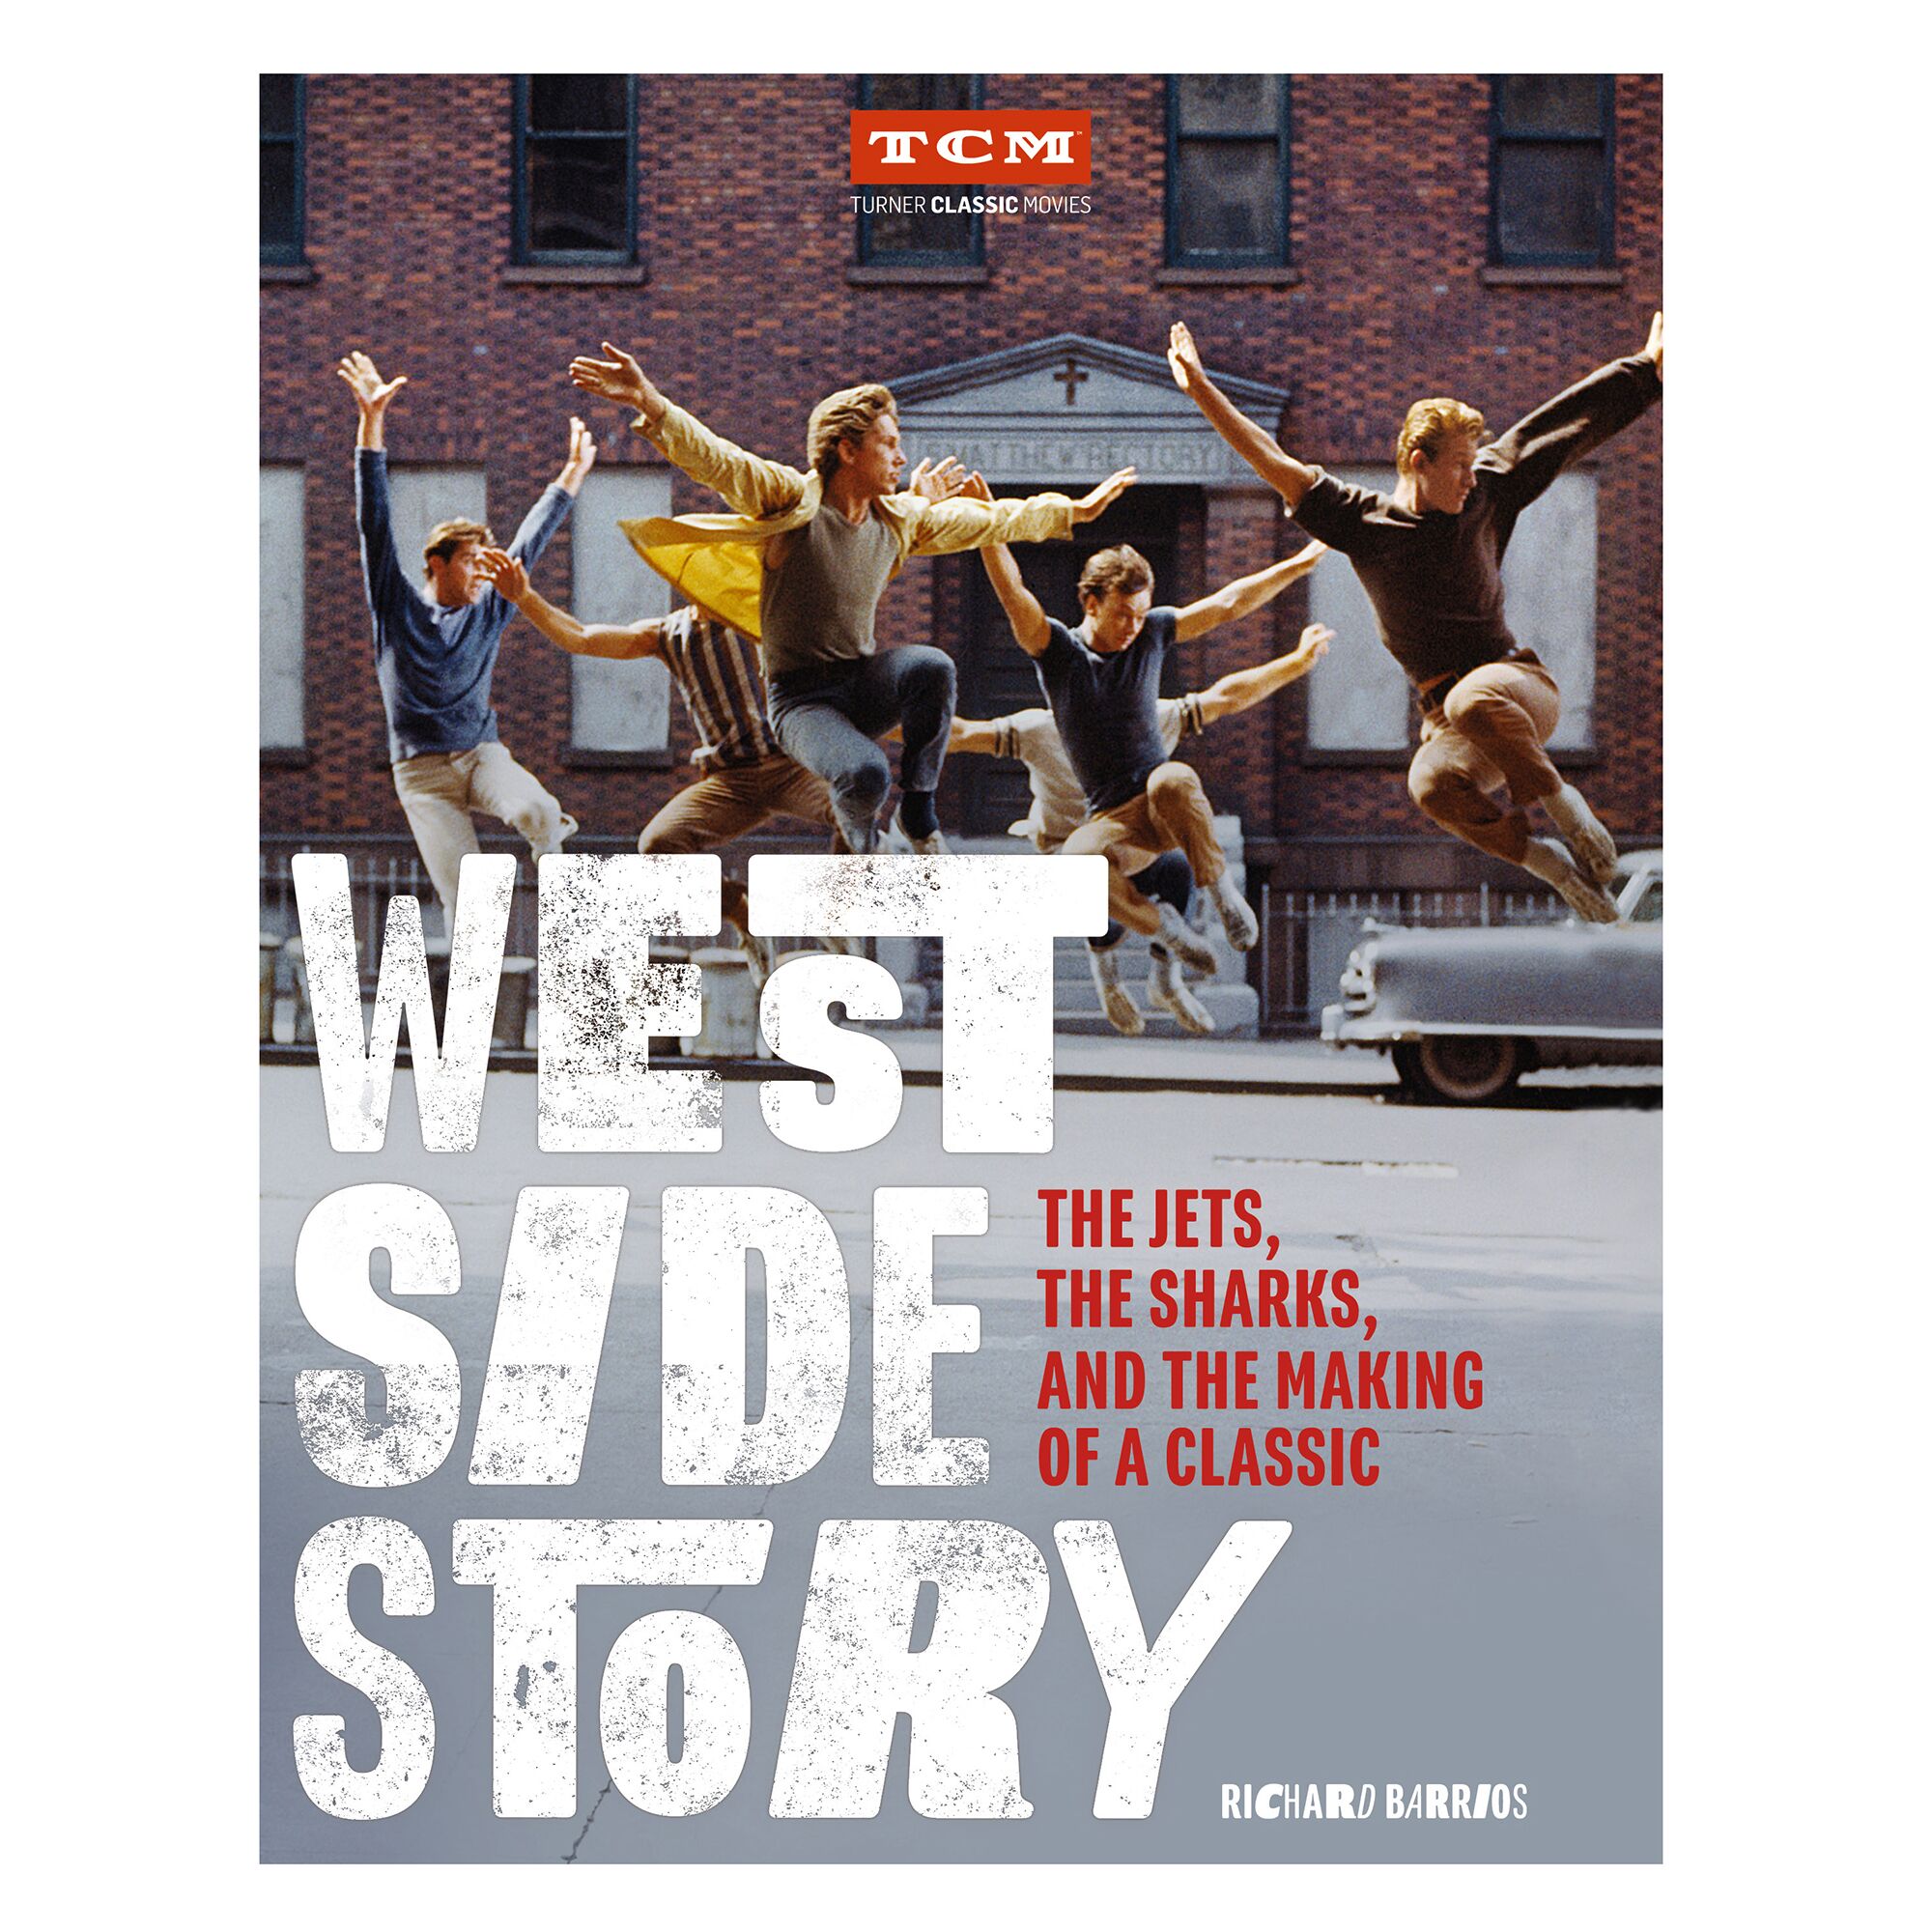 Cover of West Side Story: The Jets, the Sharks, and the Making of a Classic by Richard Barrios and Turner Classic Movies